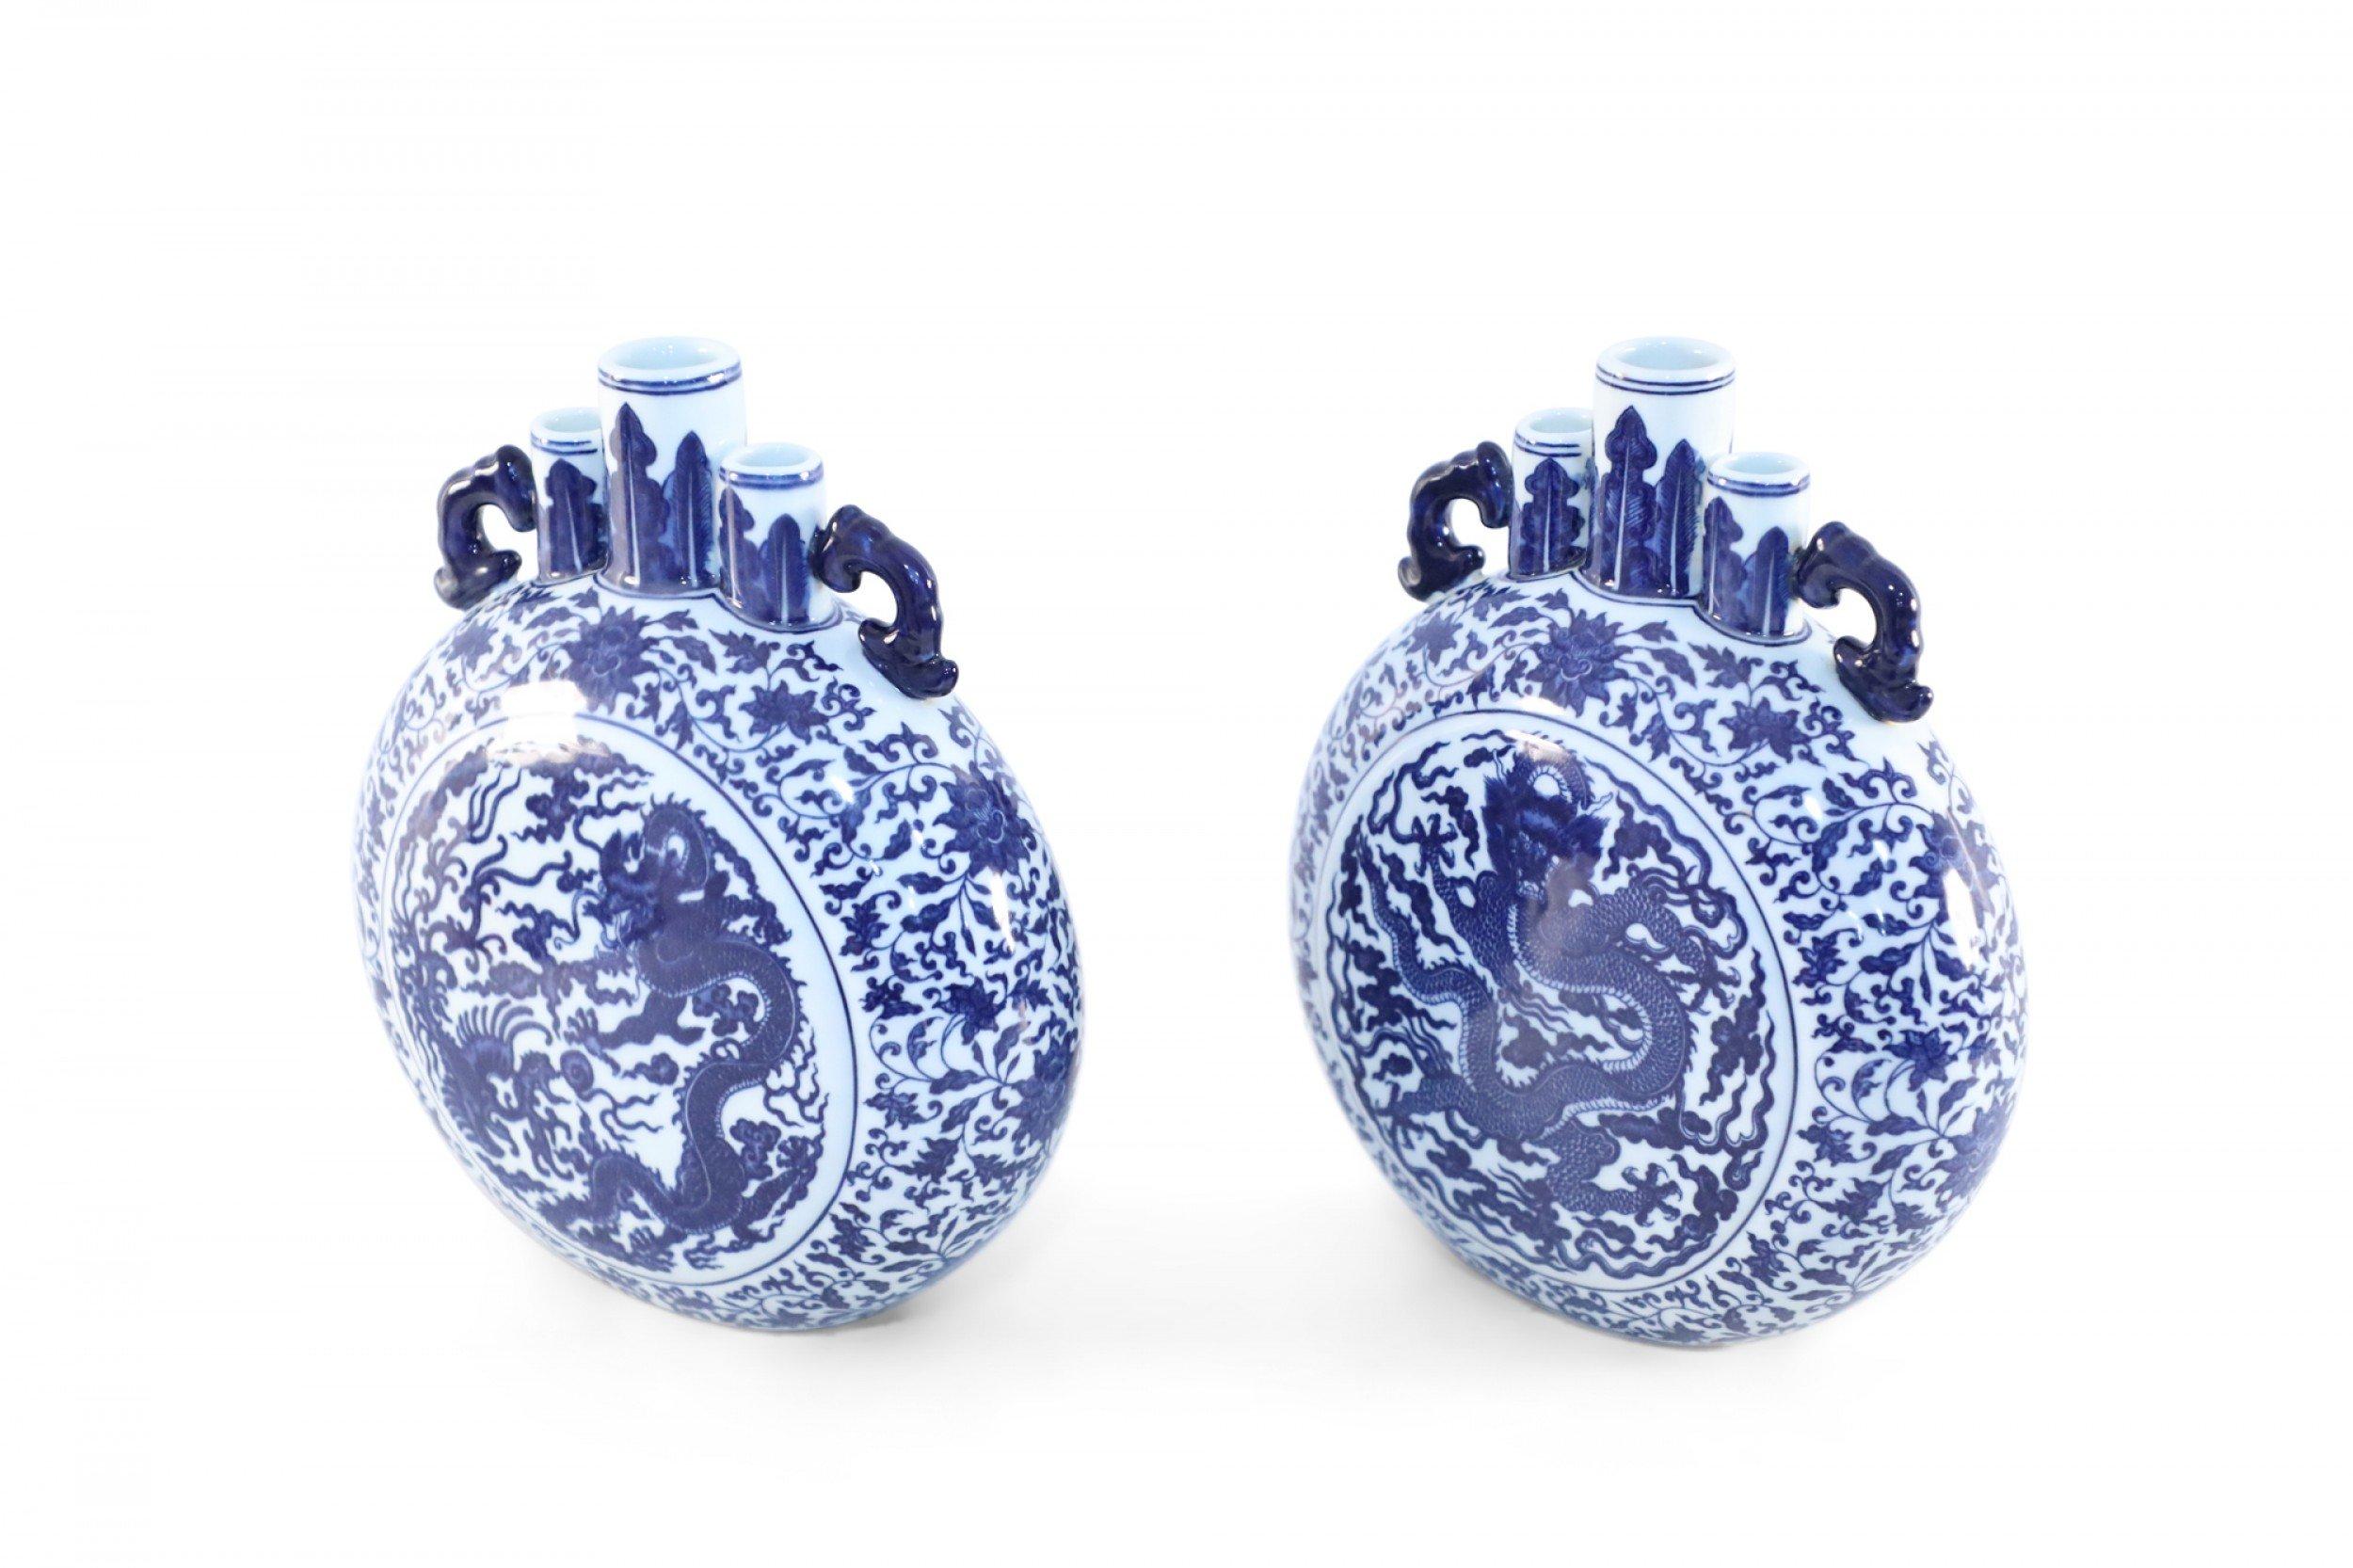 Pair of antique Chinese (Late 19th century) blue and white porcelain moon flask vases depicting centered dragon motifs surrounded by floral and vine designs, and topped with two blue handles flanking three separate mouth openings (date mark on